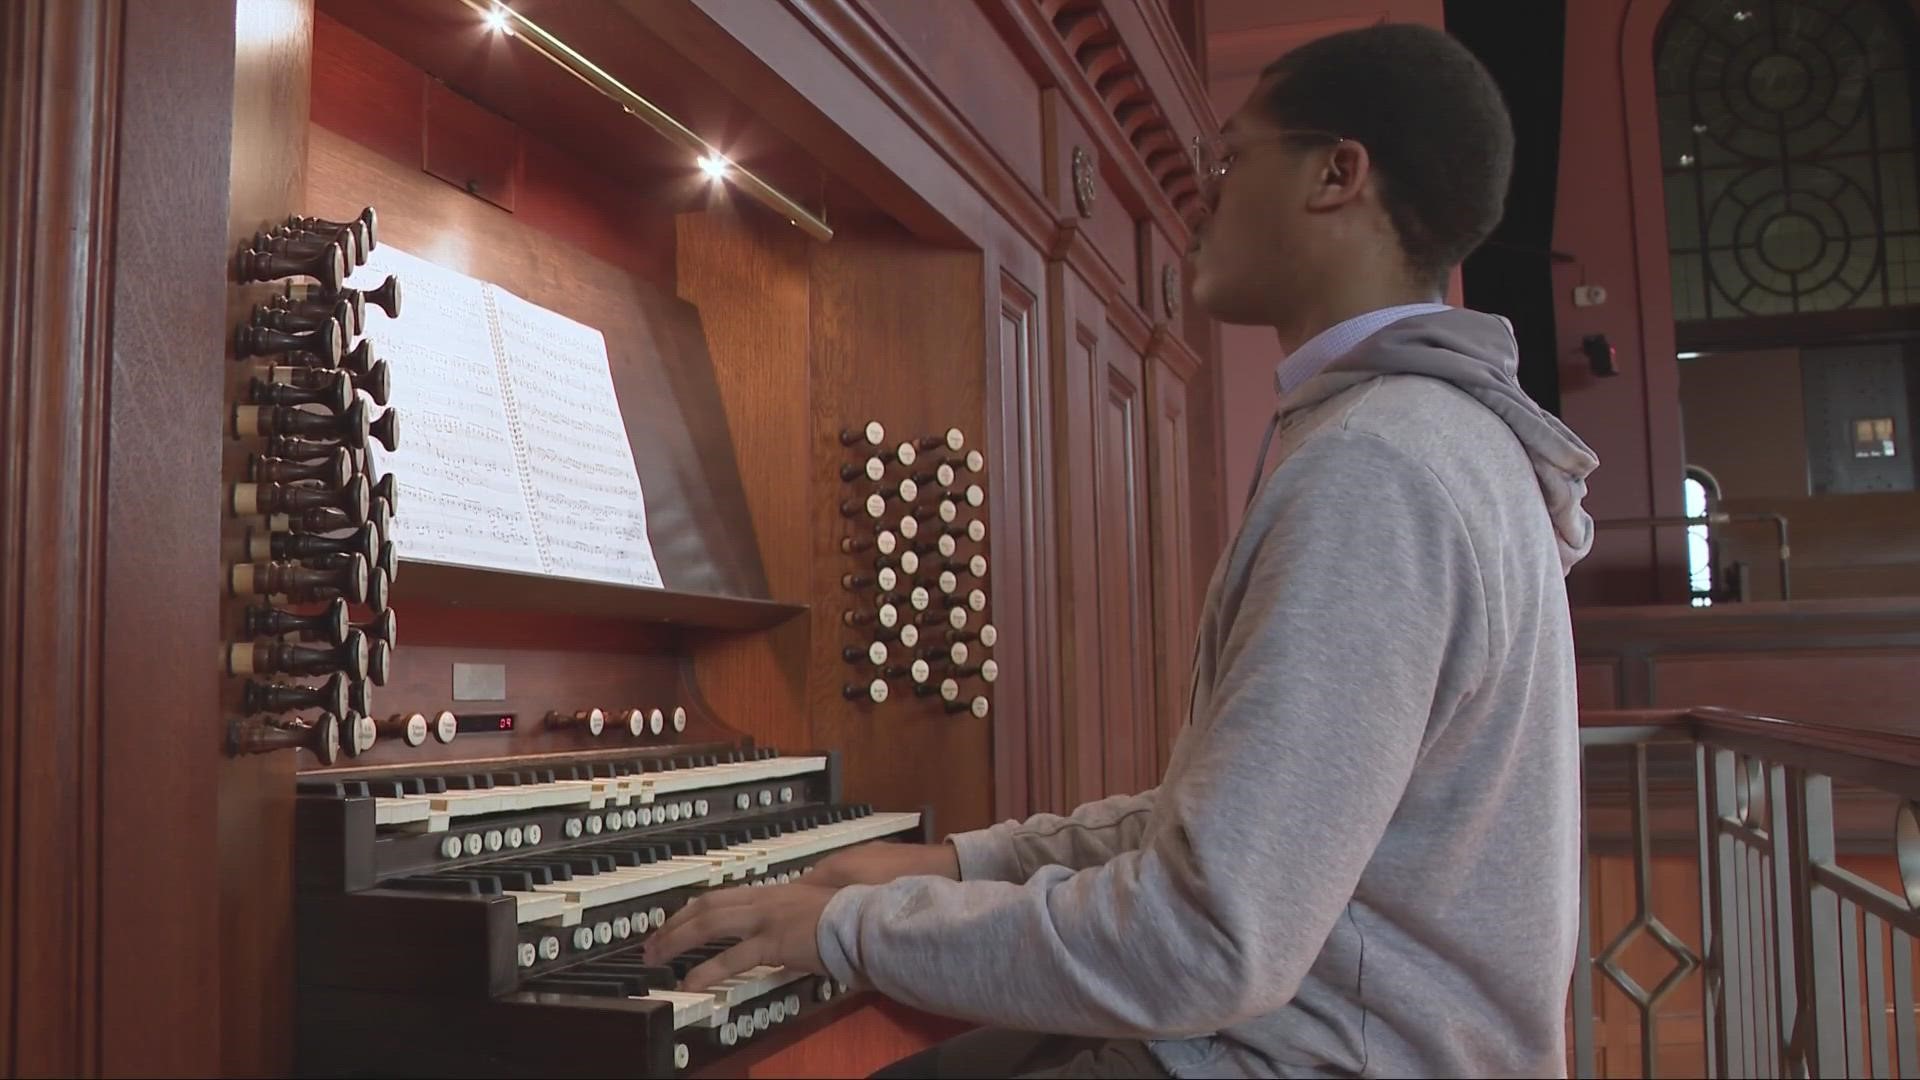 For Black musicians, Oberlin College's Conservatory of Music has been a game-changer from the 19th Century to the present.